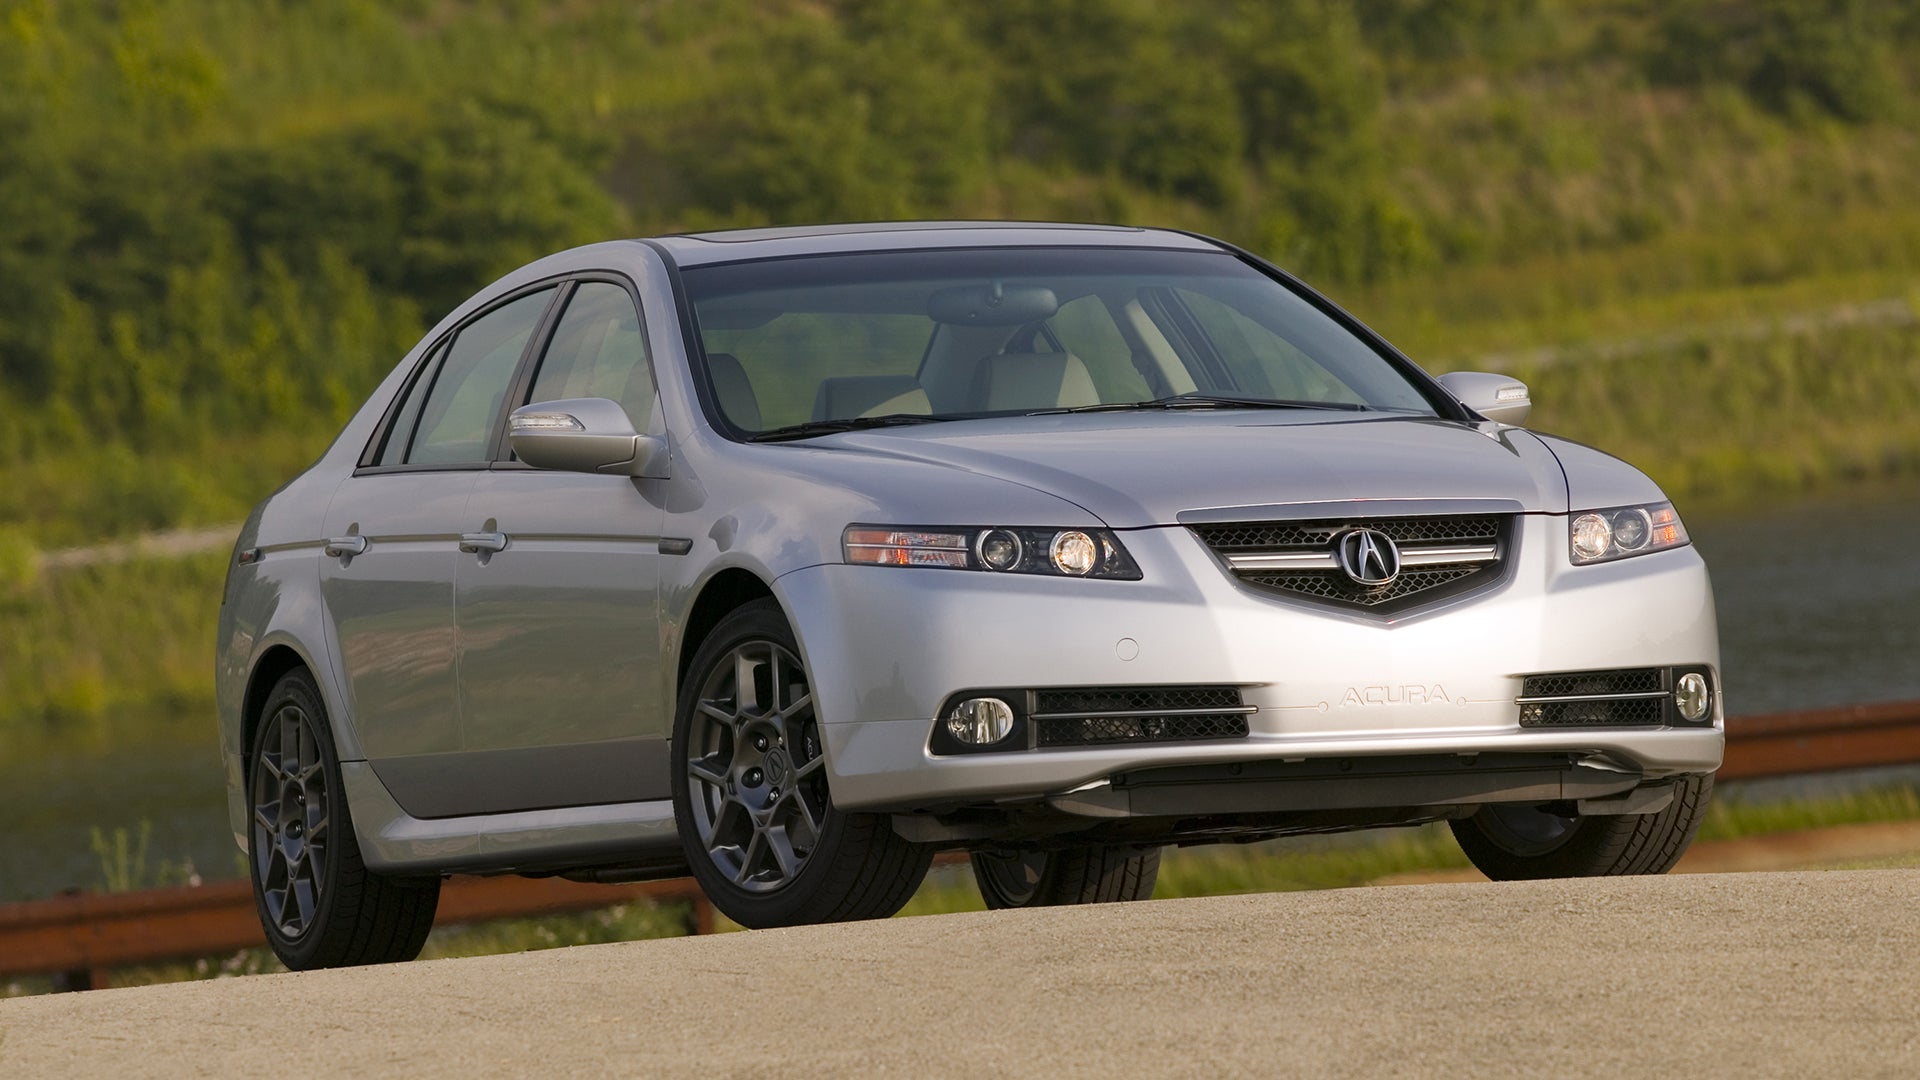 <p class="caption-title">2007-2008 Acura TL Type S</p>, The TL Type S first arrived for 2002-2003, then later appeared for 2007-2008., <i>Acura</i>